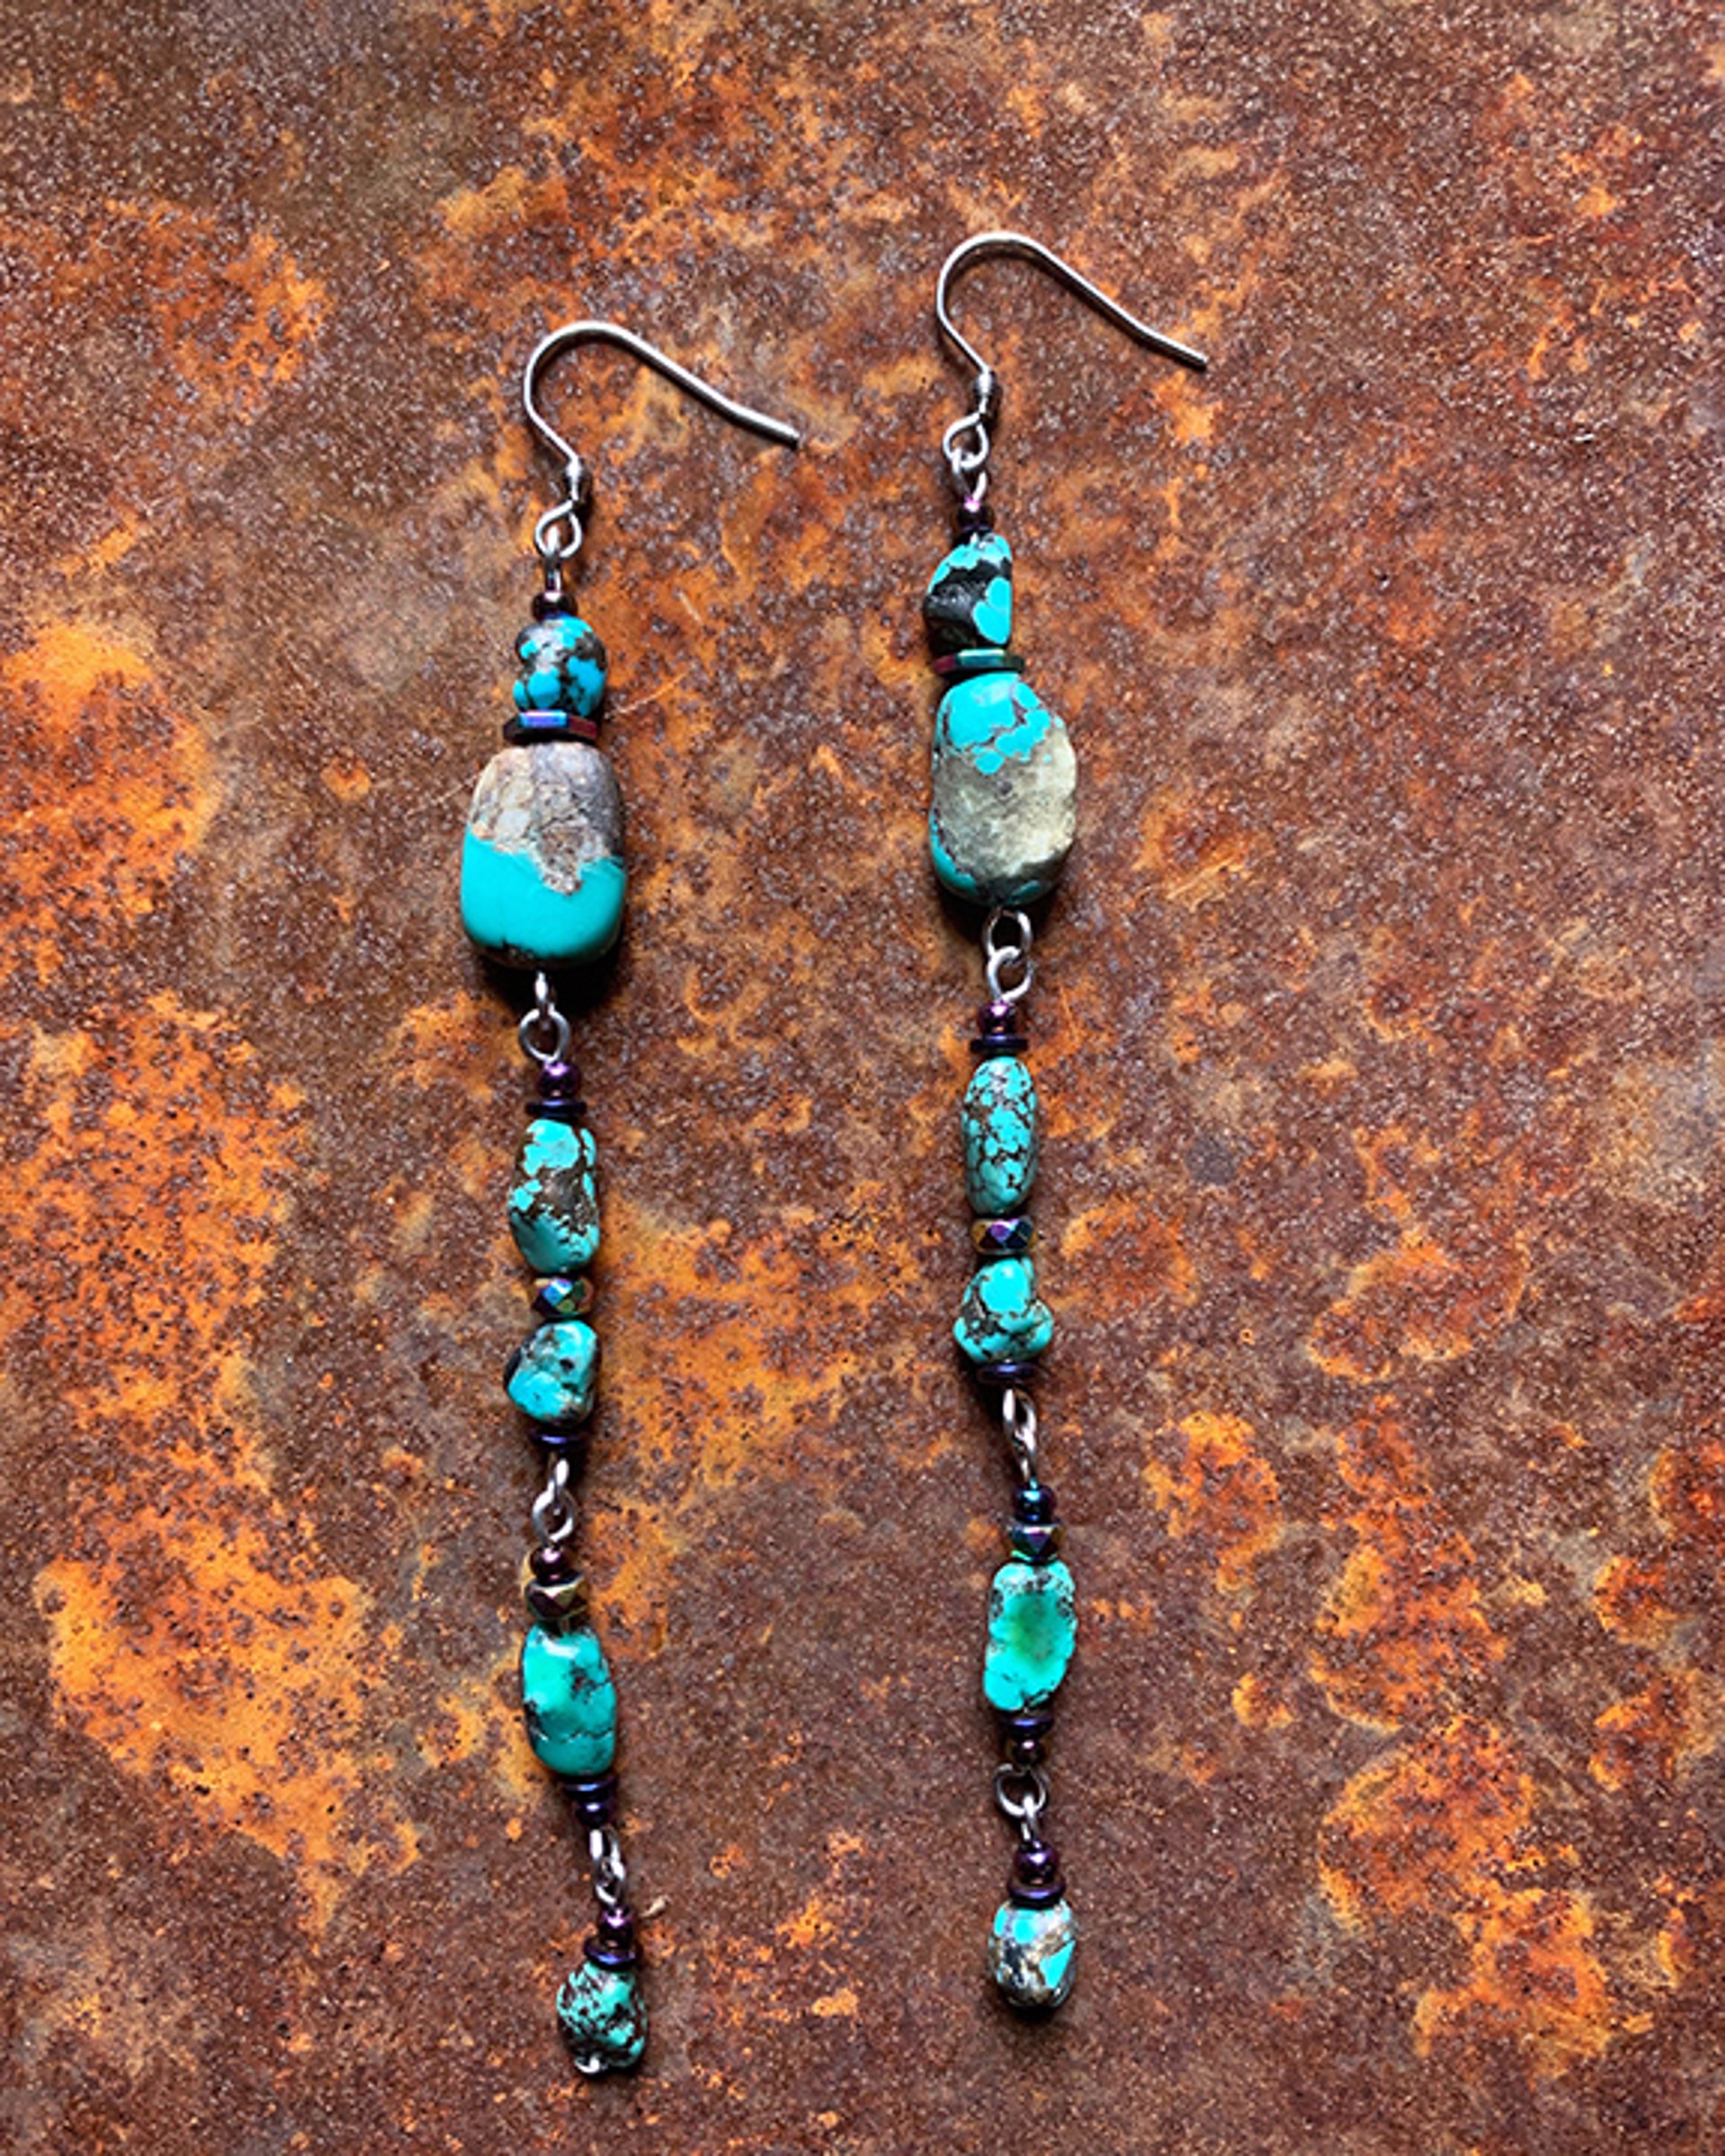 K716 Turquoise and Hematite Earrings by Kelly Ormsby